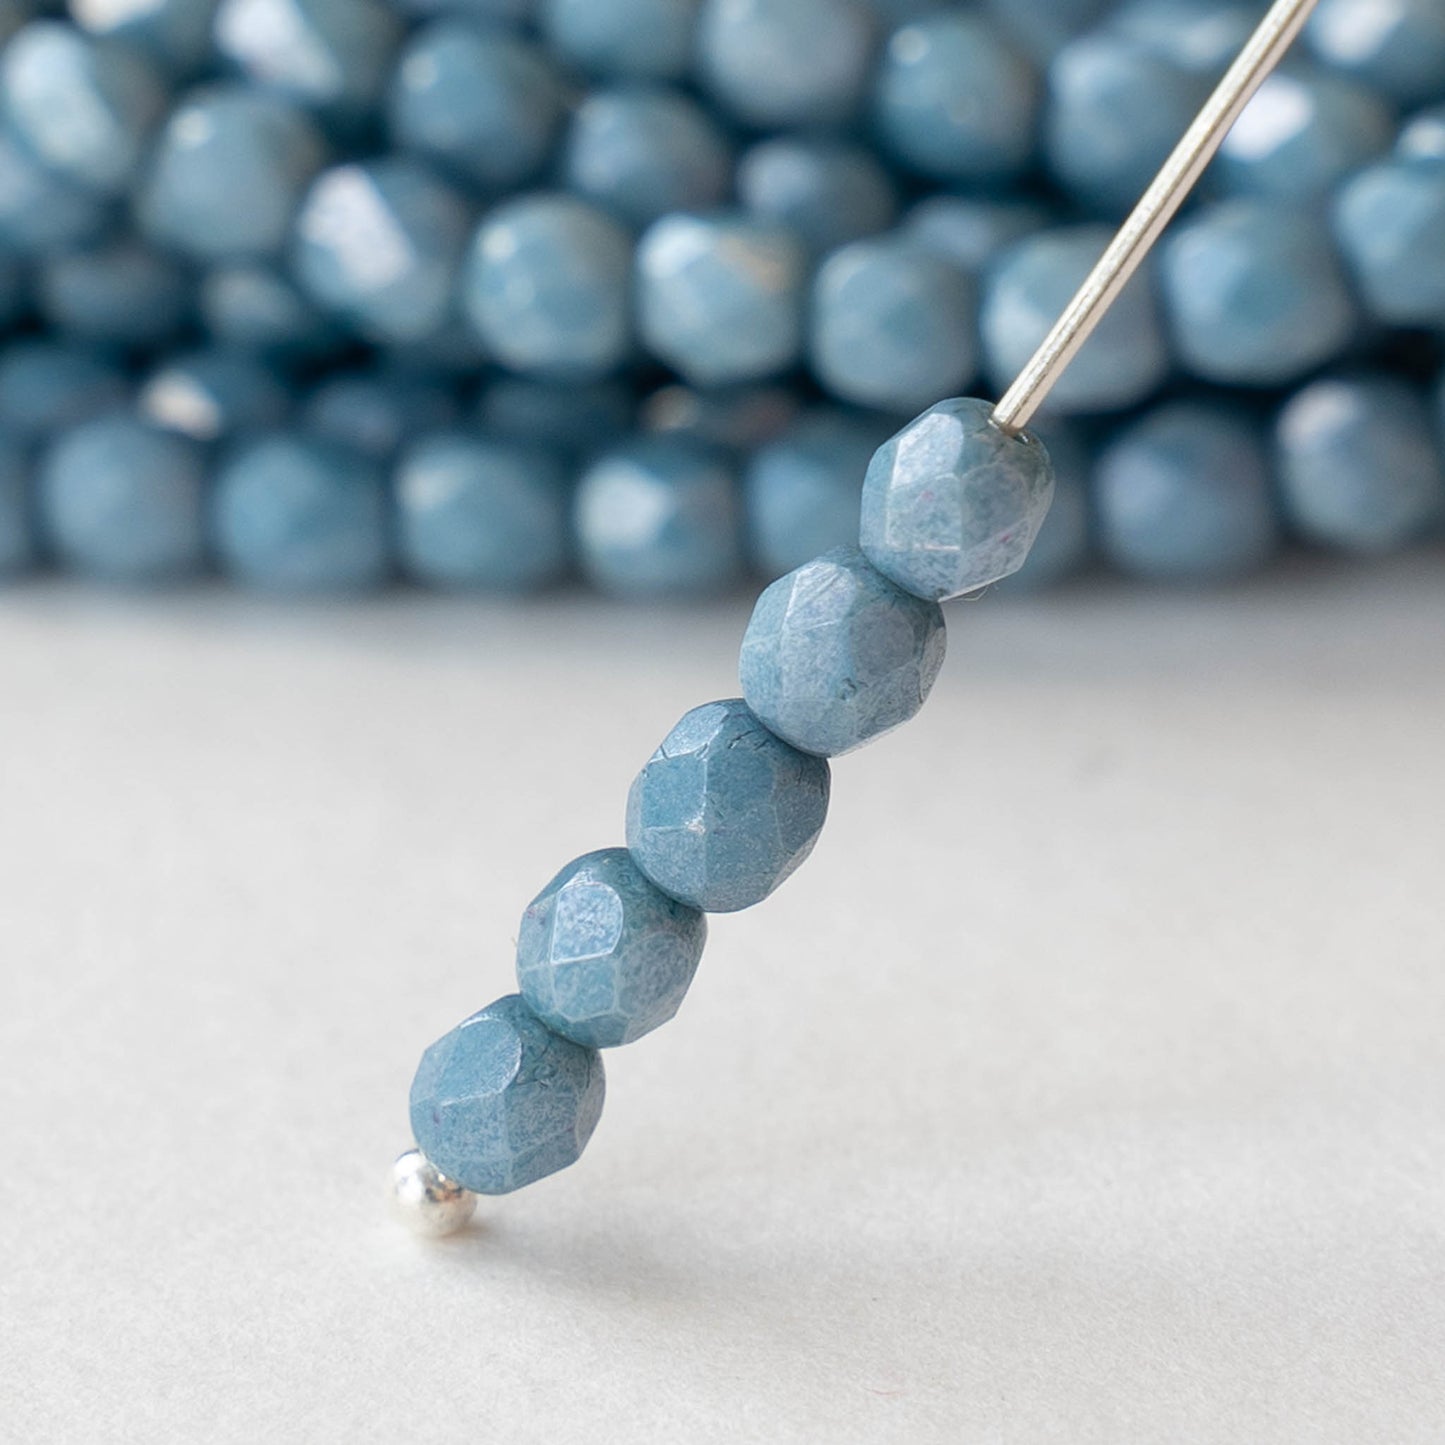 4mm Round Firepolished Beads - Slate Blue Luster - 50 Beads